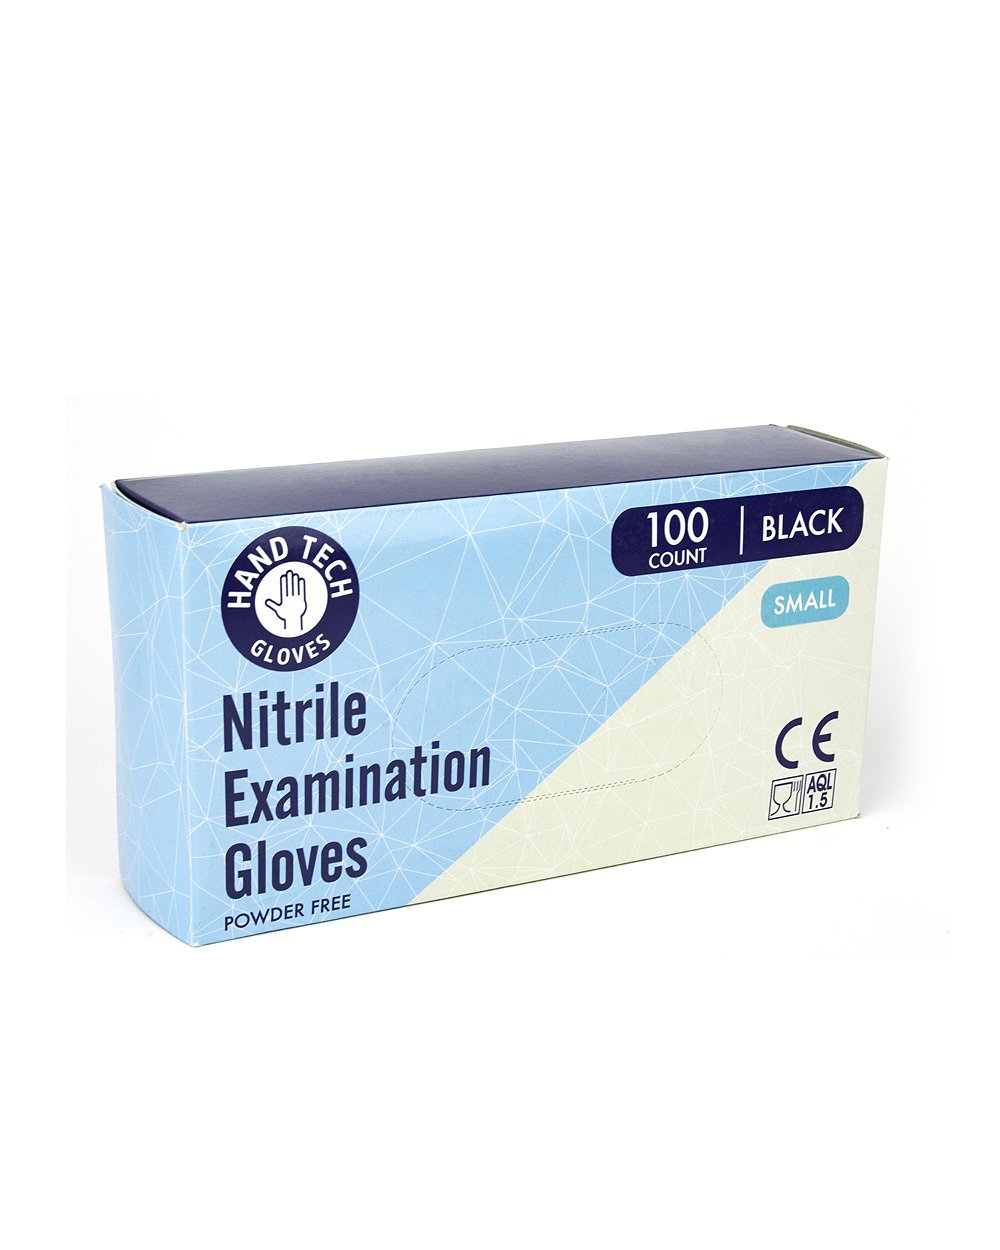 HAND TECH | Powder-Free Disposable Gloves | Black - Nitrile - 100 Count - 4